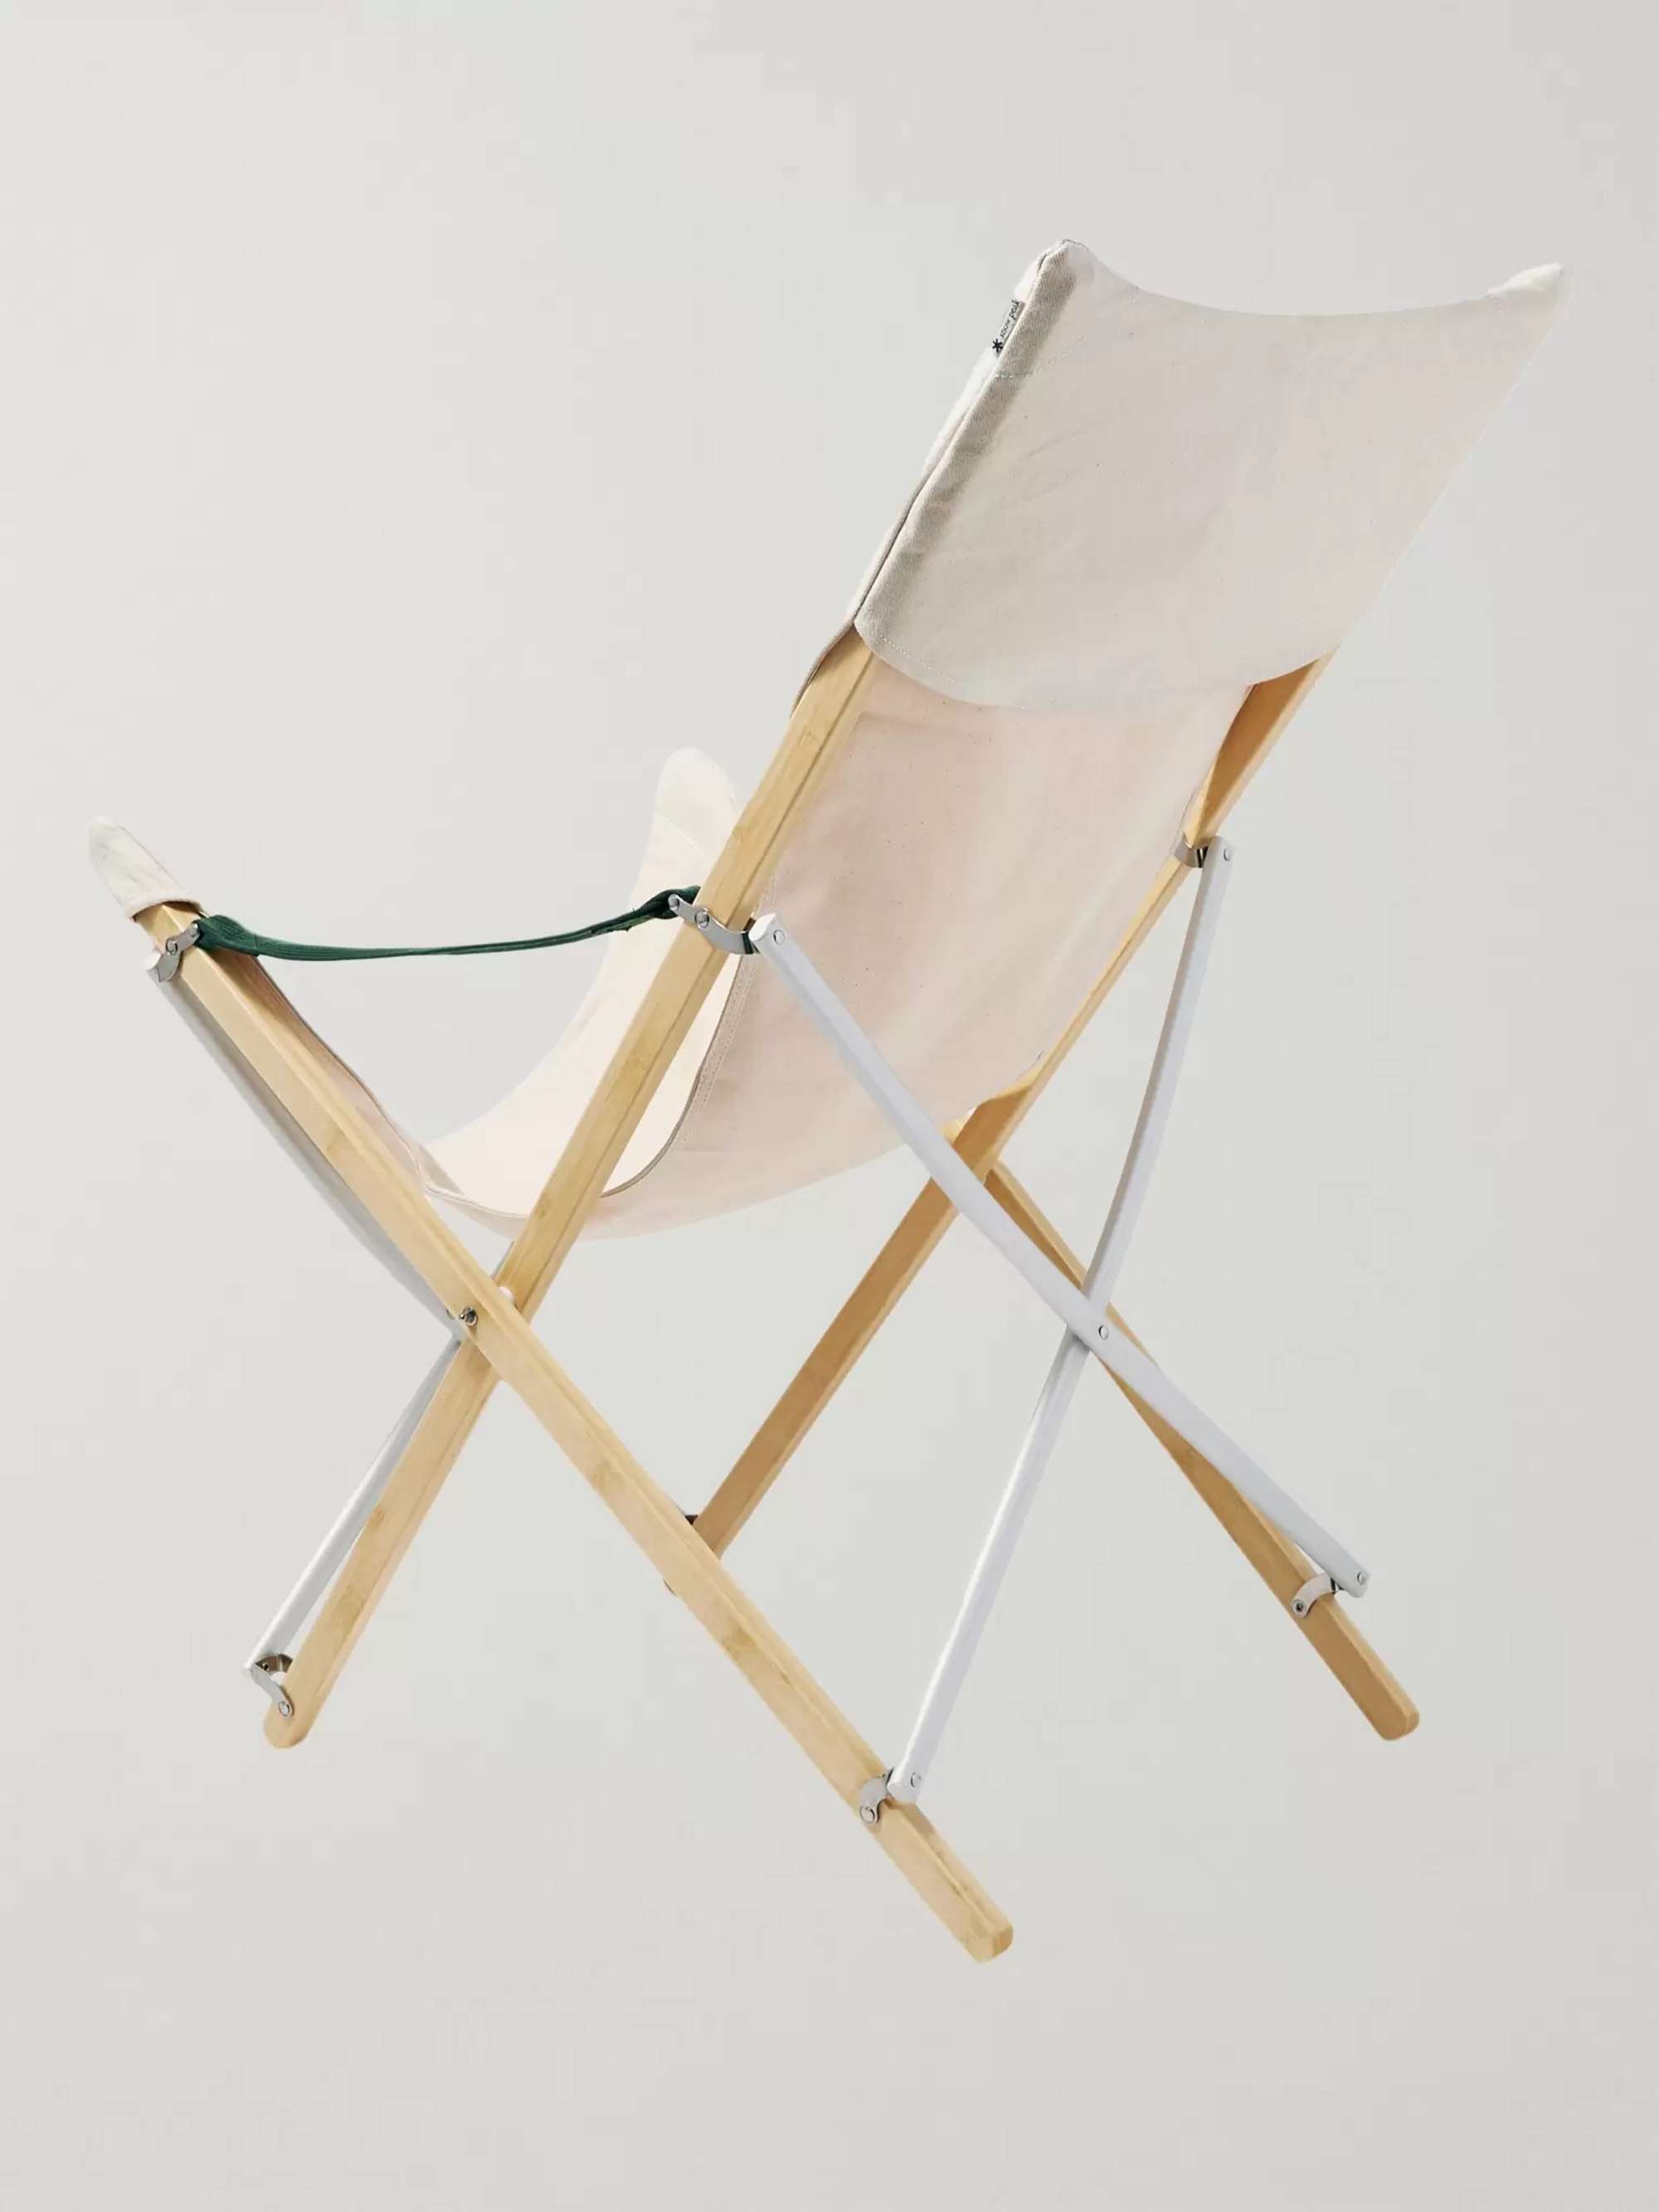 SNOW PEAK Take! Bamboo and Canvas Chair